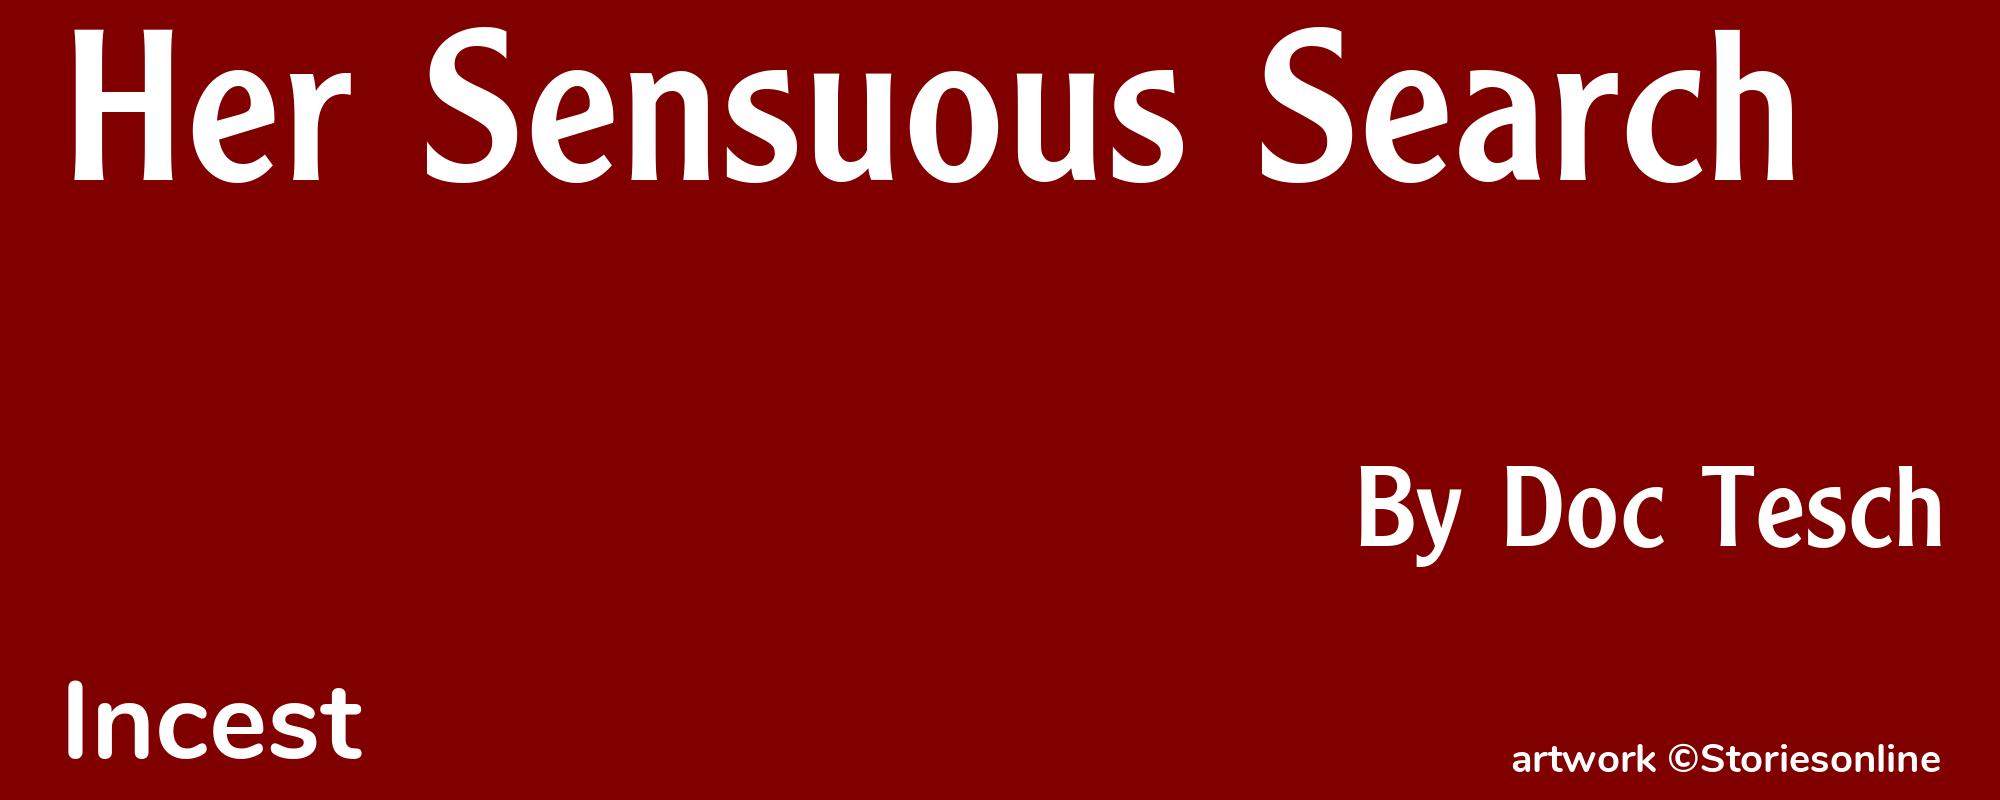 Her Sensuous Search - Cover